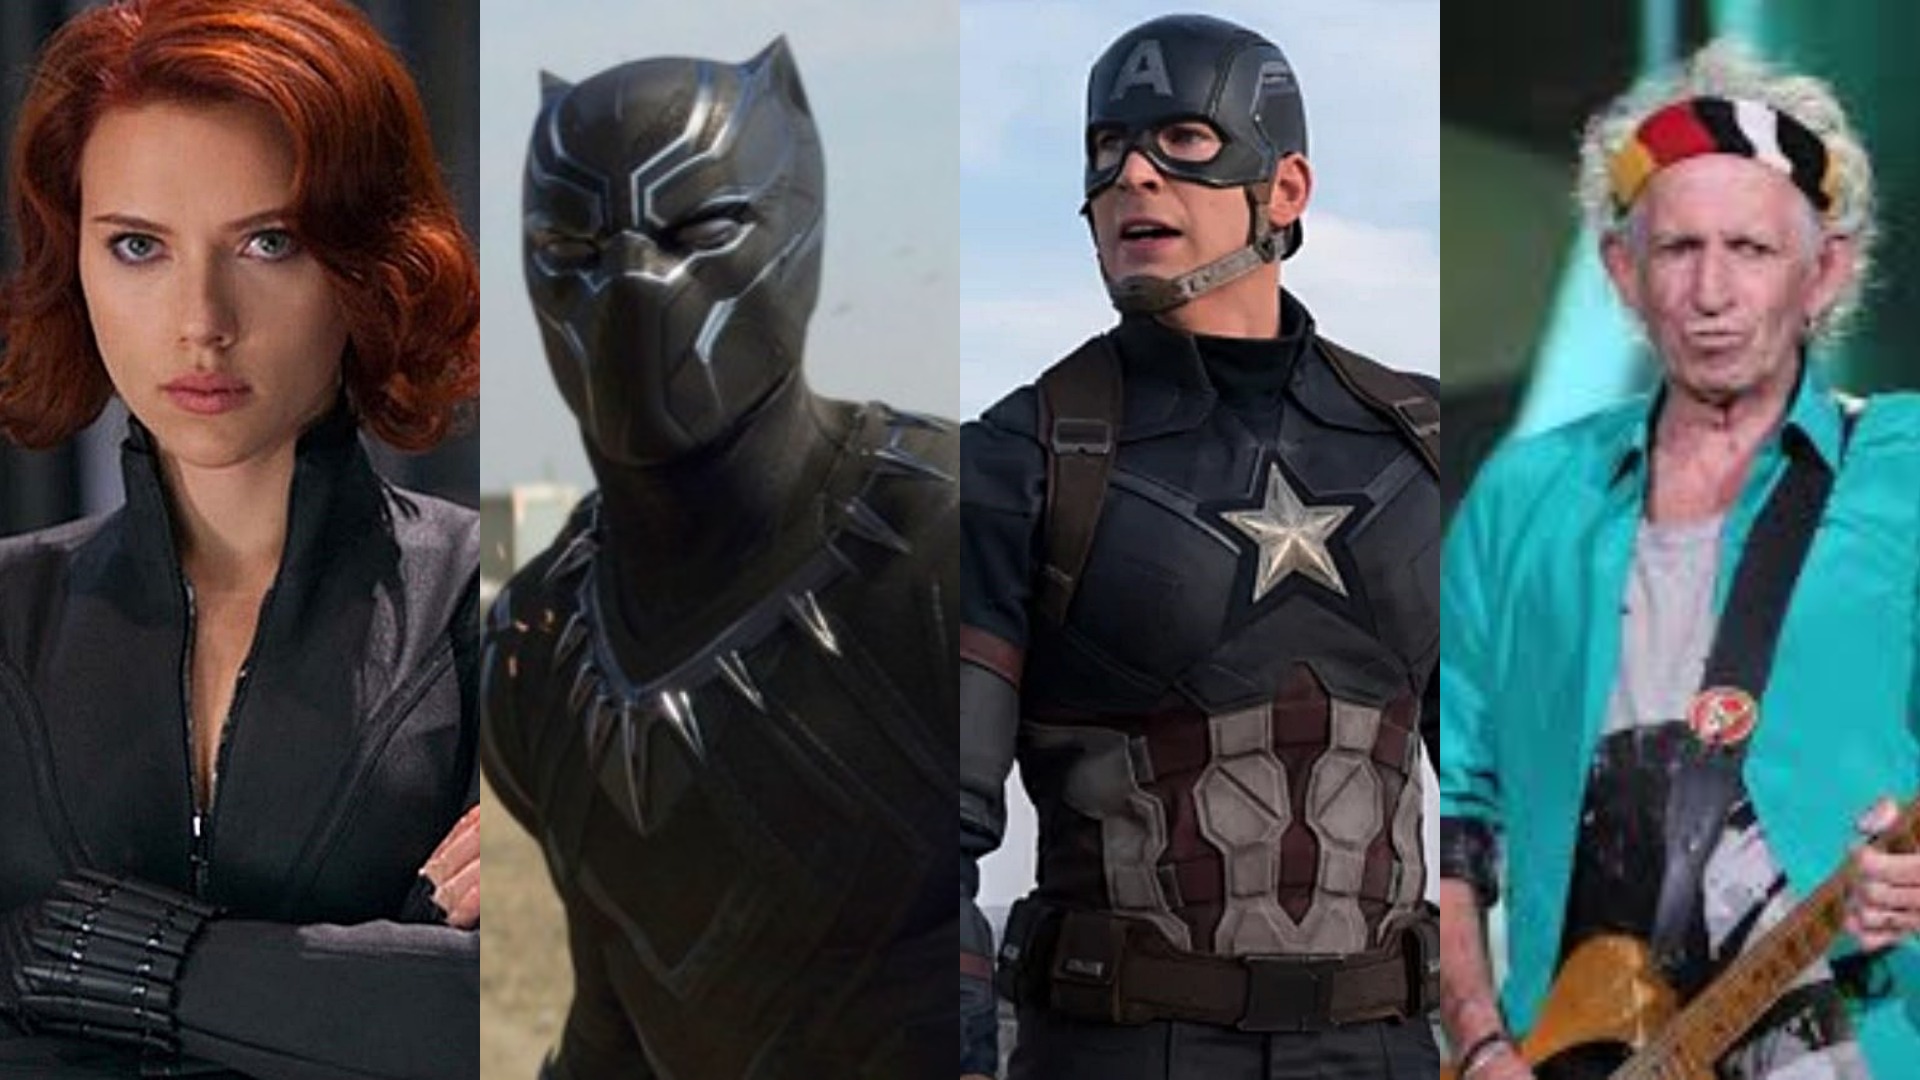 Only a Real Marvel Fan Can Match These Characters With Their Superpowers pjimage 181